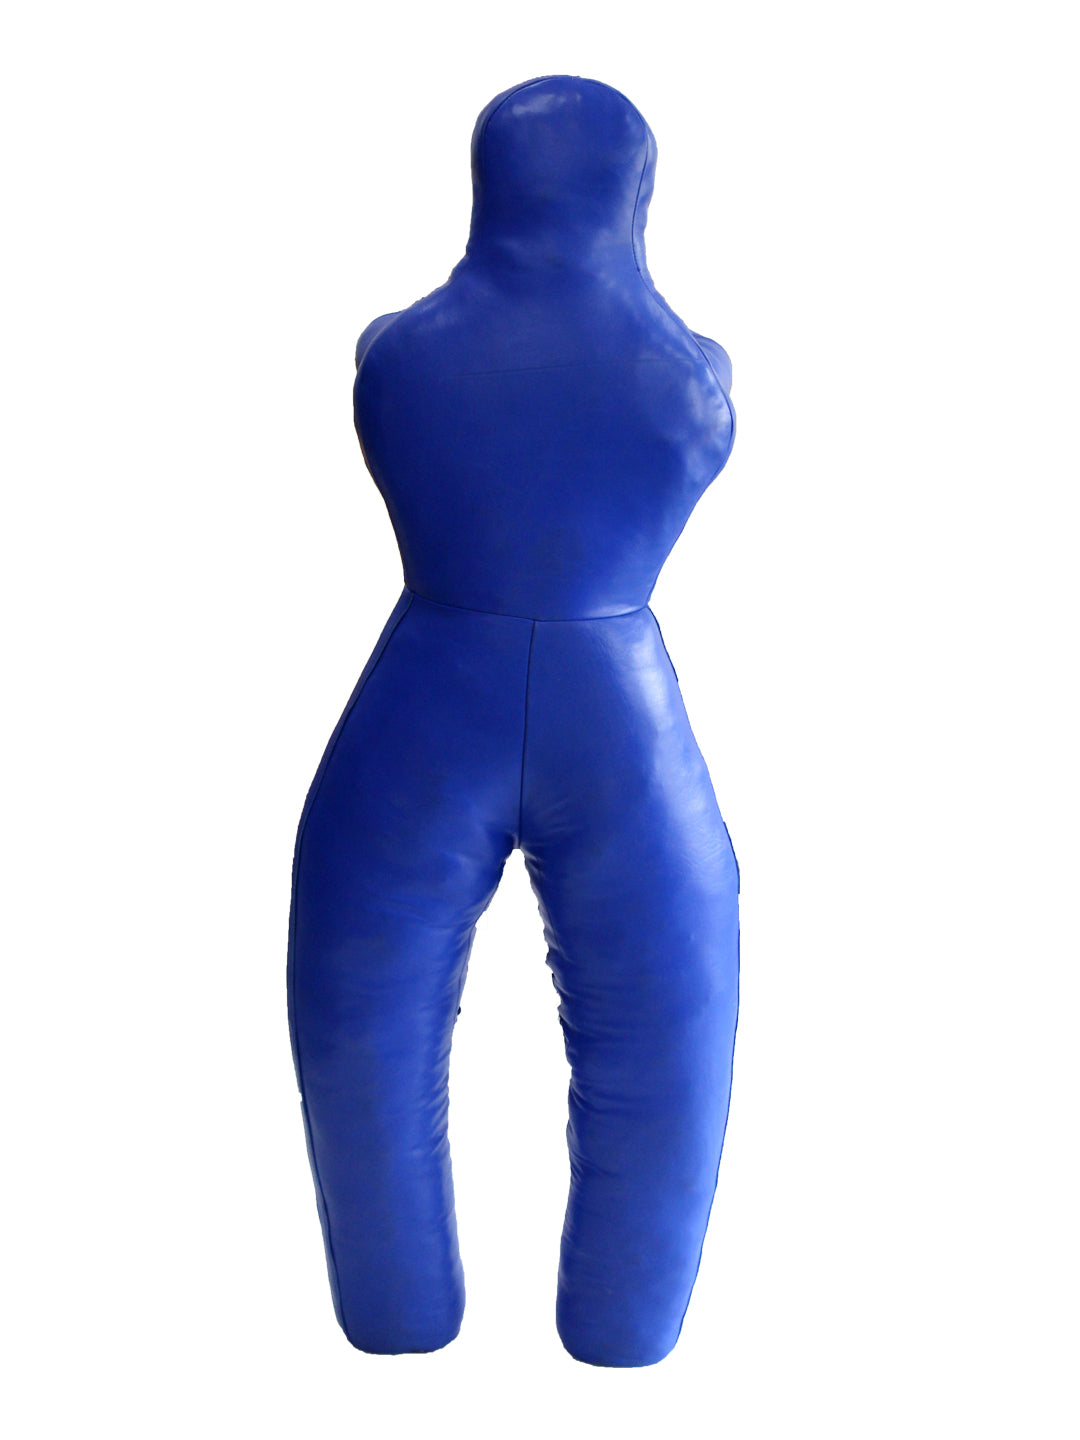 Invincible Wrestling Leather Dummy